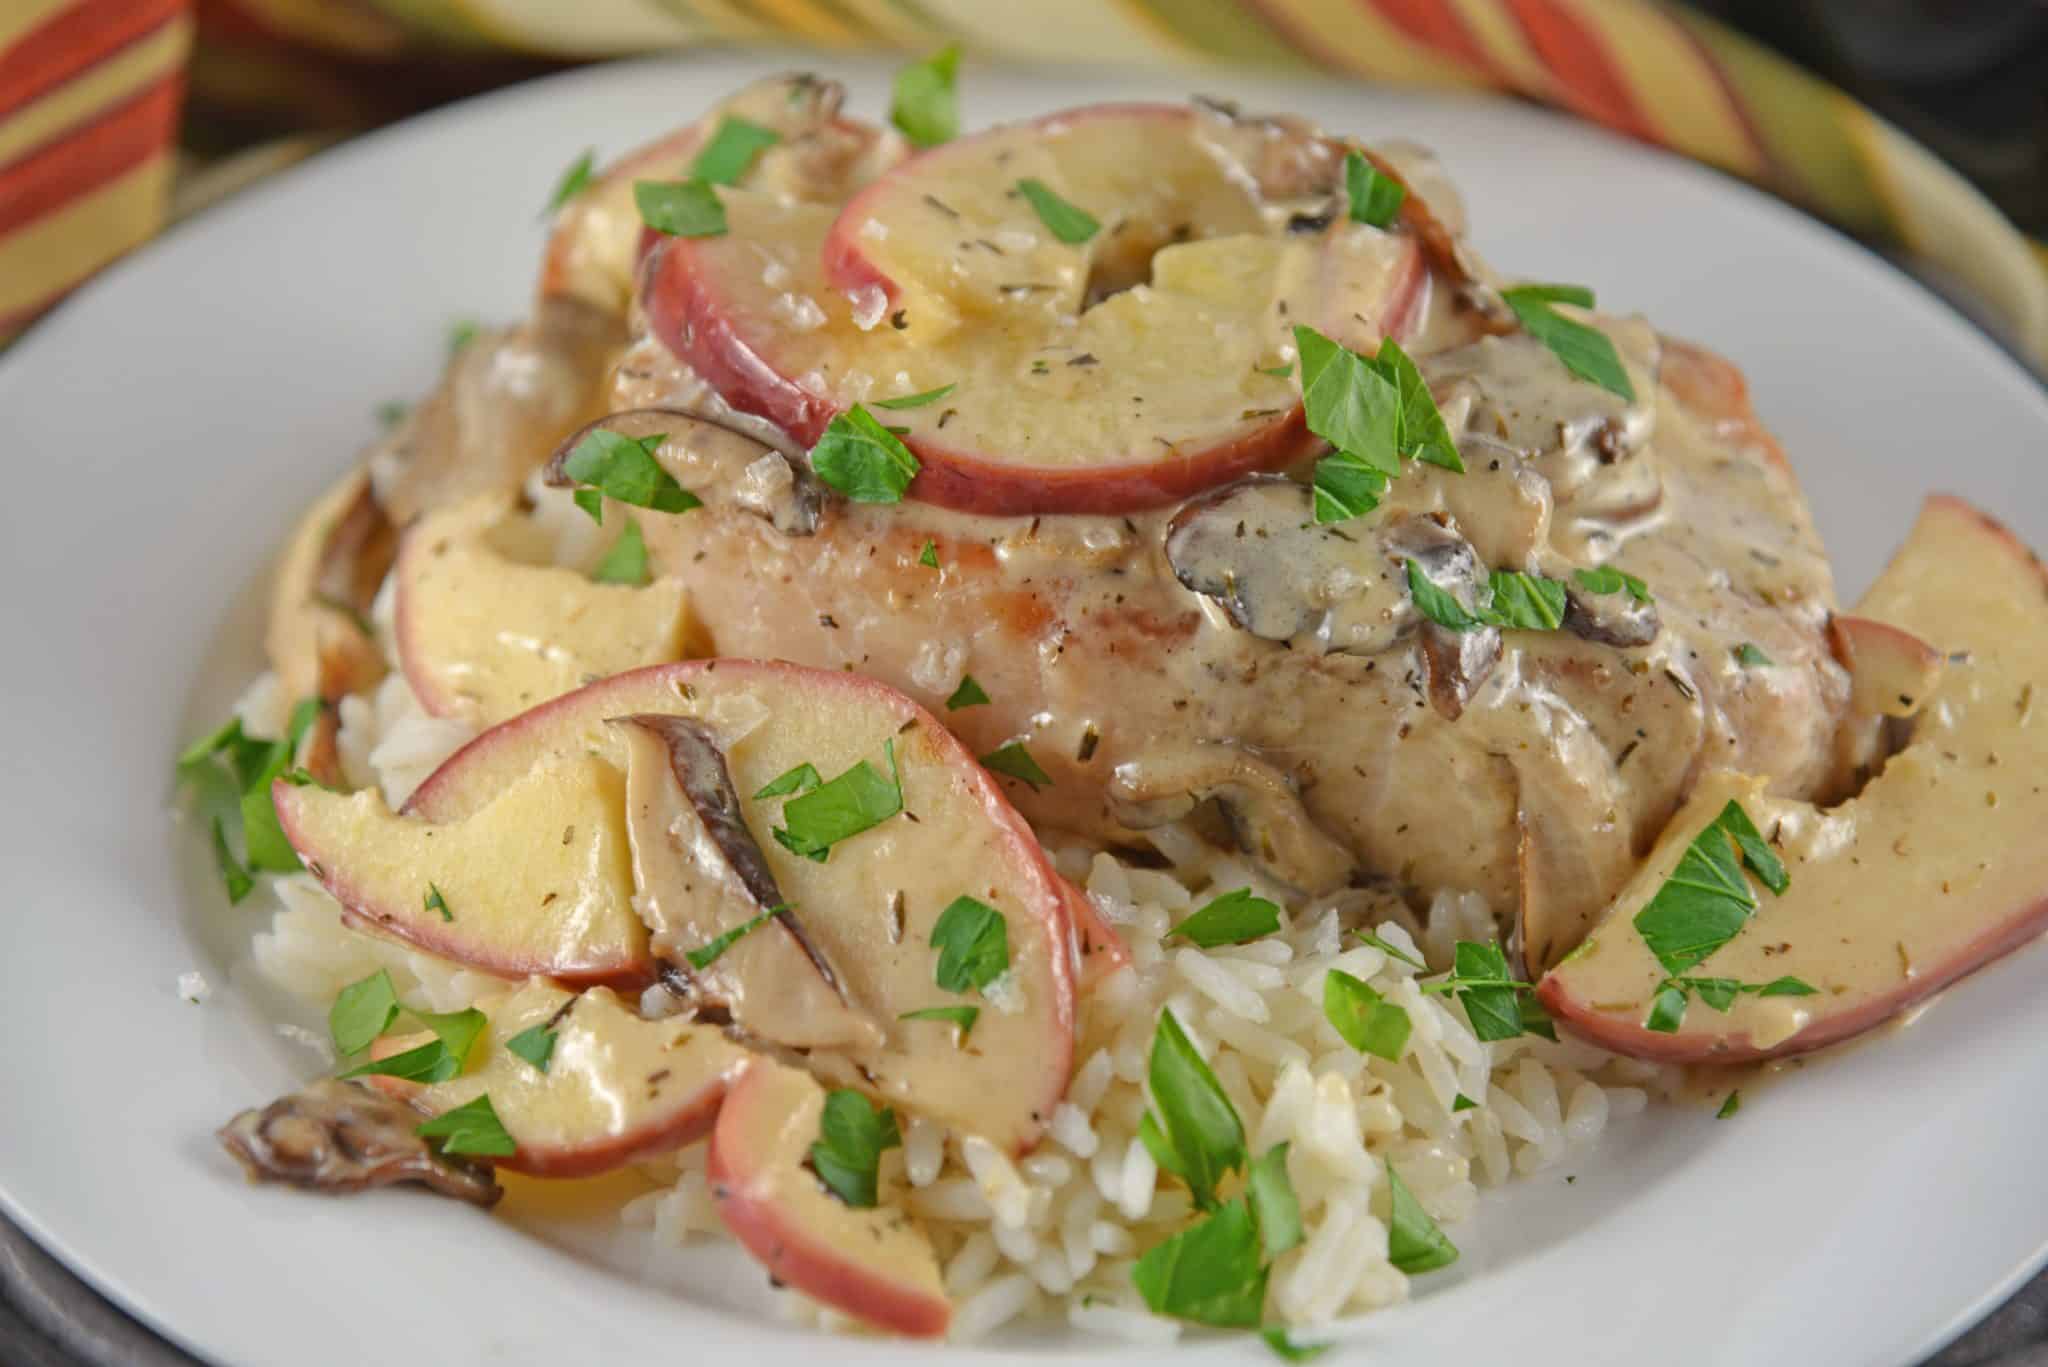 Creamy Apple Pork Chops are a wholesome meal your whole family will enjoy. Mushrooms, apples, juicy pork chops in a savory cream sauce all ready in just 15 minutes. Serve with rice, couscous or noodles. #easyporkchoprecipe www.saovryexperiments.com 